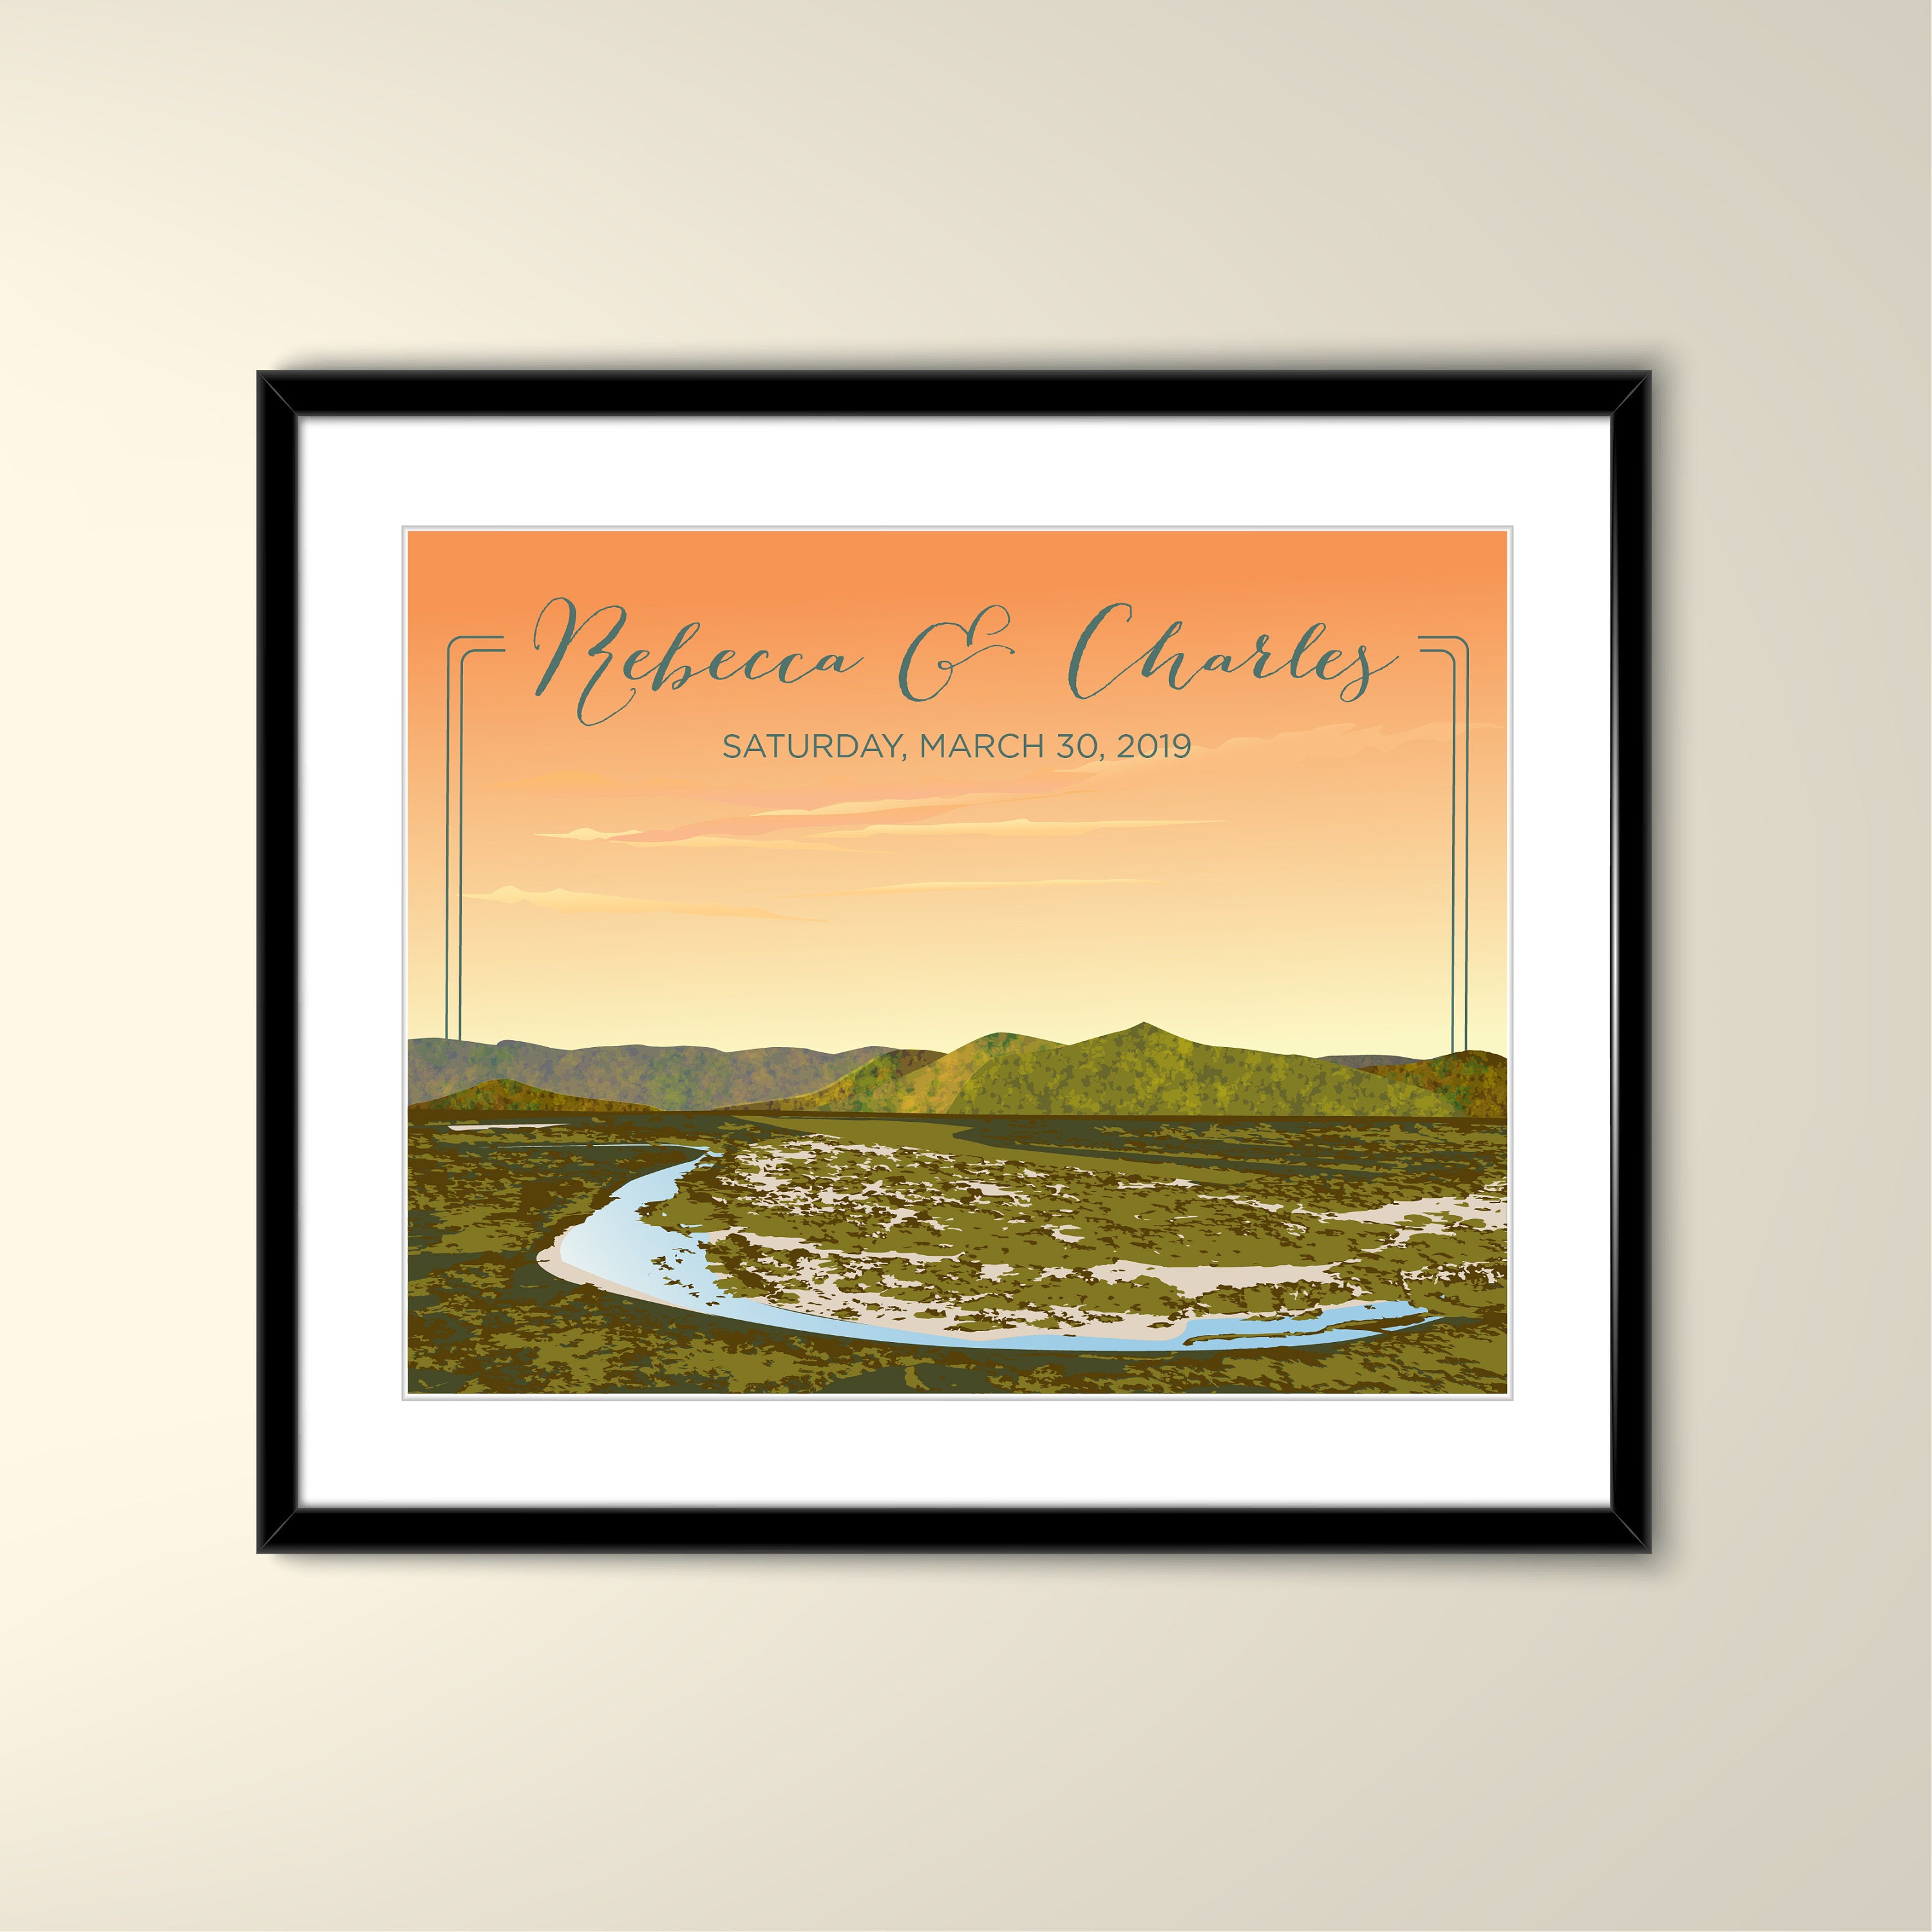 Texas Hill Country and River Vintage Travel 11x14 Paper Poster - Wedding Poster personalized with Names and date (frame not included)